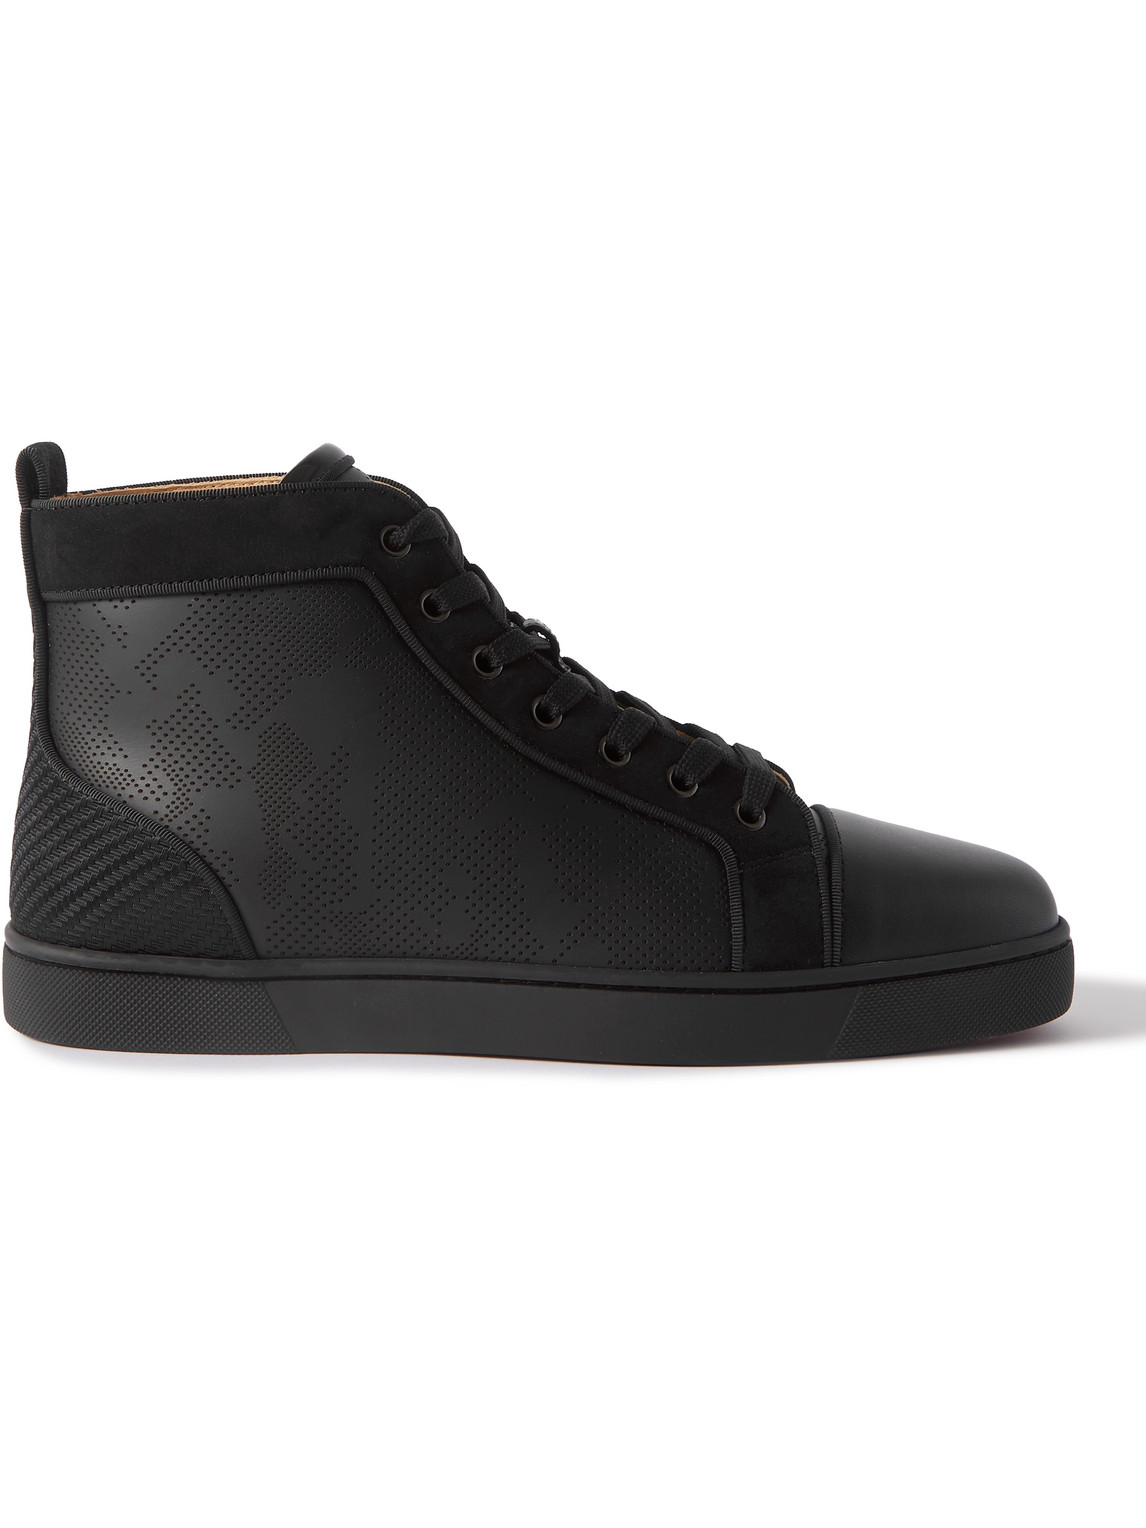 CHRISTIAN LOUBOUTIN LOUIS ORLATO GROSGRAIN-TRIMMED PERFORATED LEATHER HIGH-TOP SNEAKERS